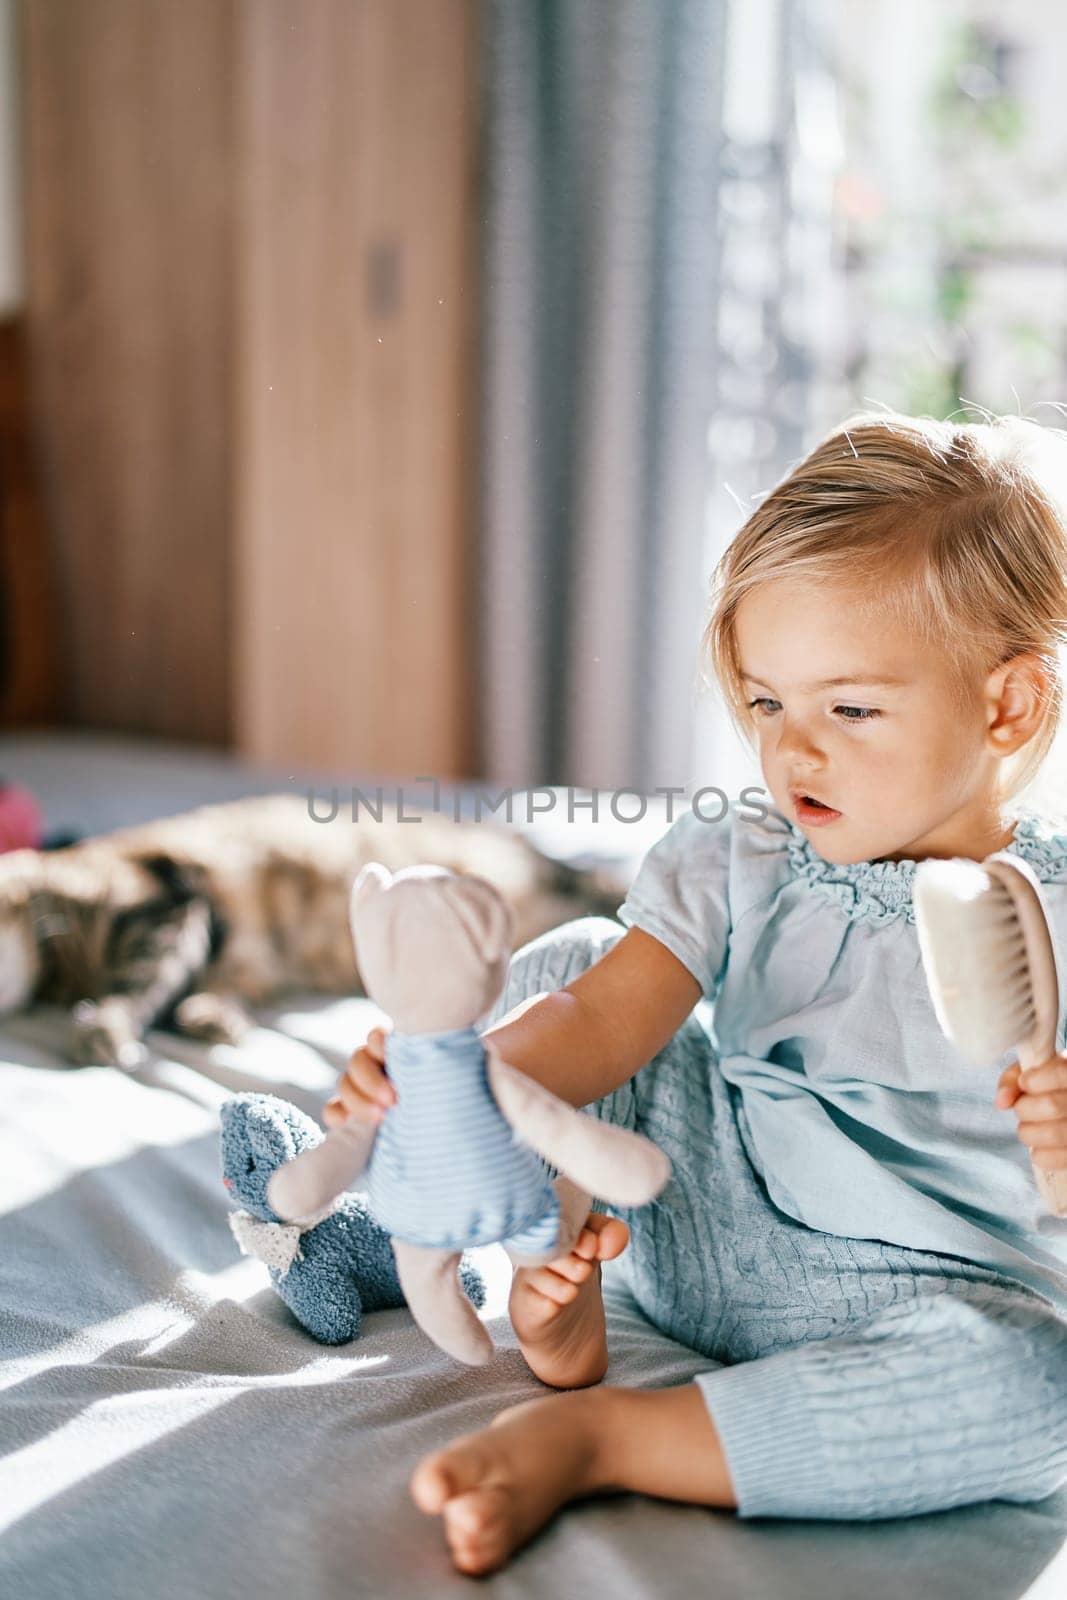 Little girl holds a teddy bear in her outstretched hand with a comb in her other hand while sitting on the bed by Nadtochiy